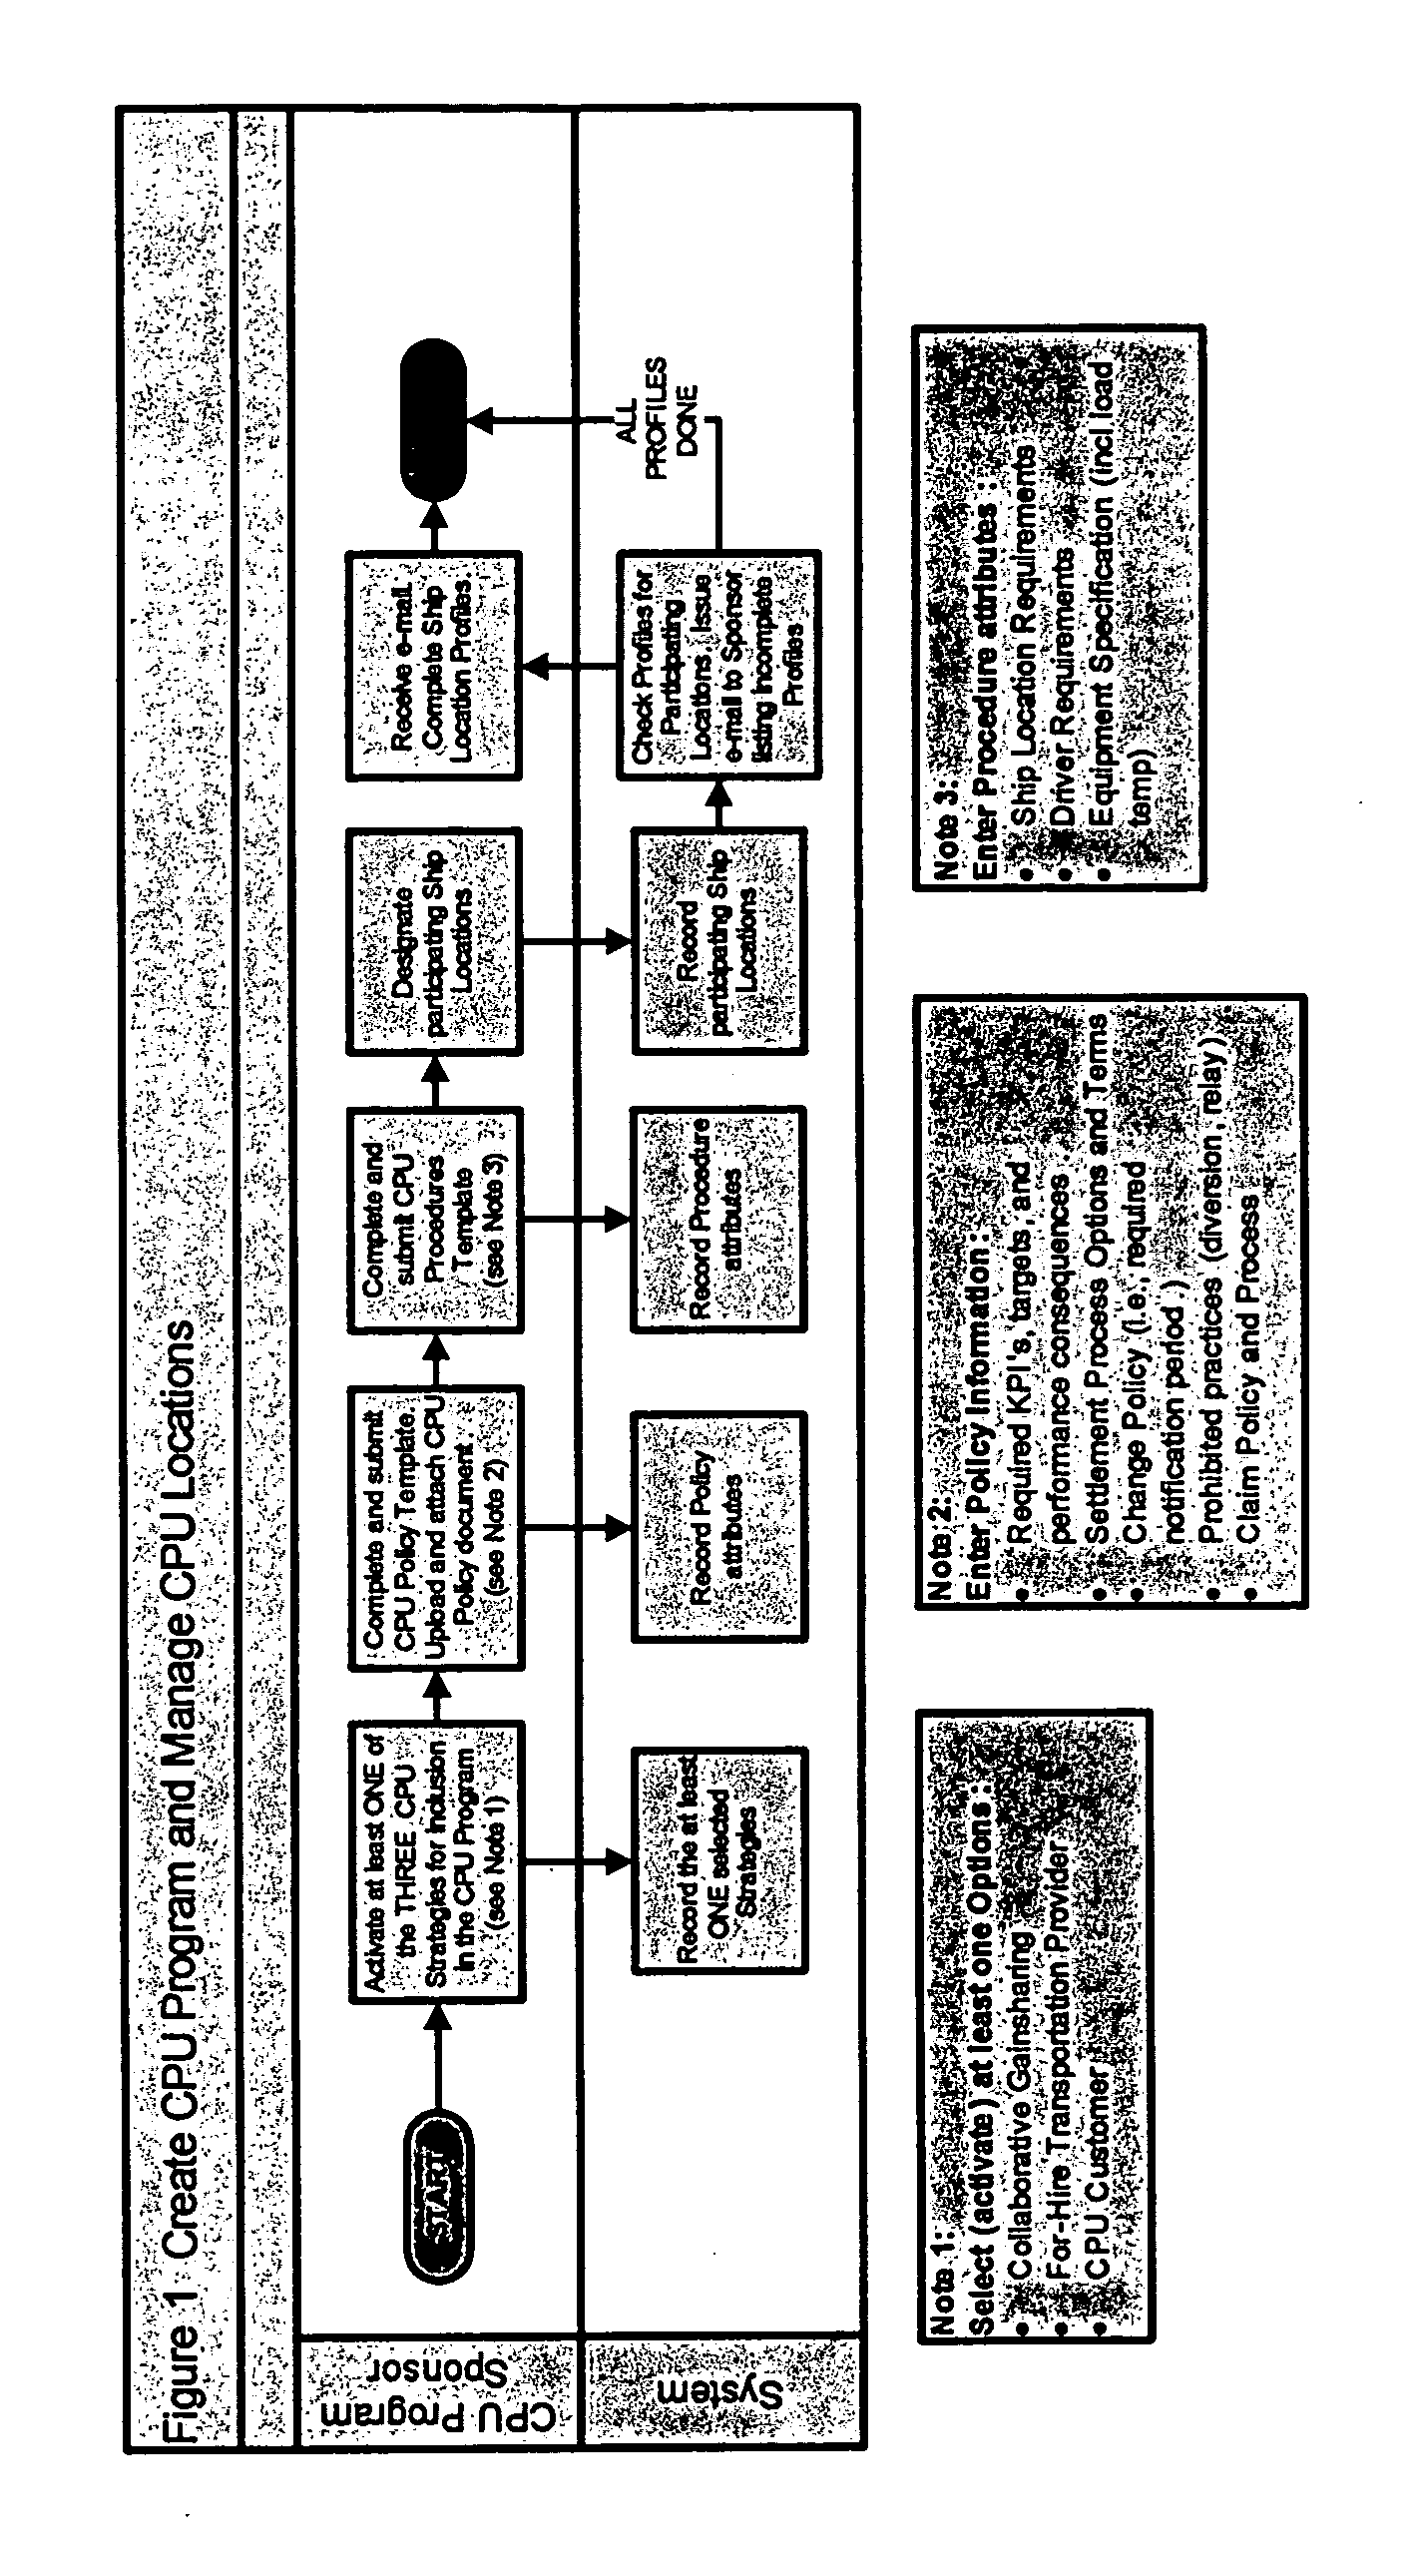 System and method for effectuating the creation and management of customer pick-up/backhaul programs between buyers and sellers in a supply community